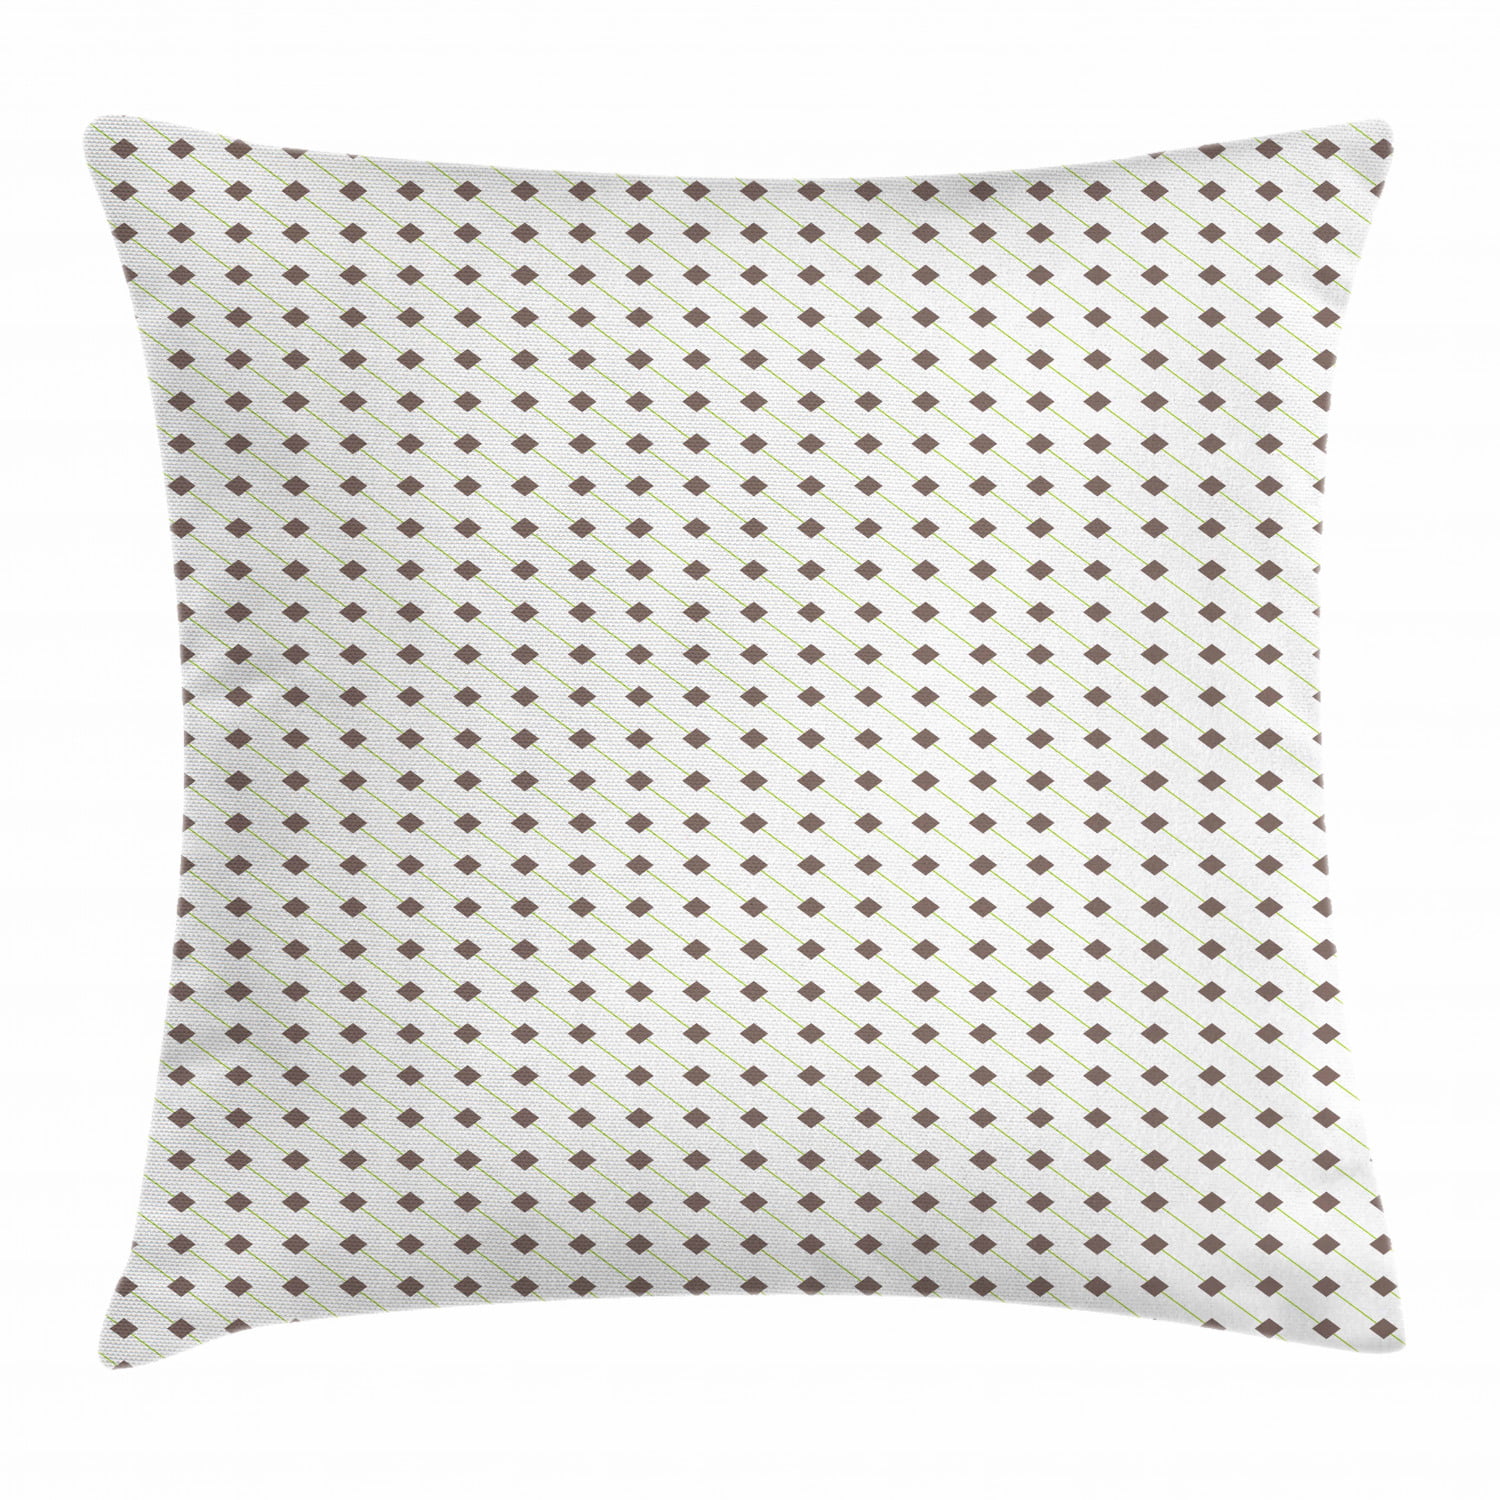 Lacoste Two Tone Waffle 18x18 Throw Pillow 